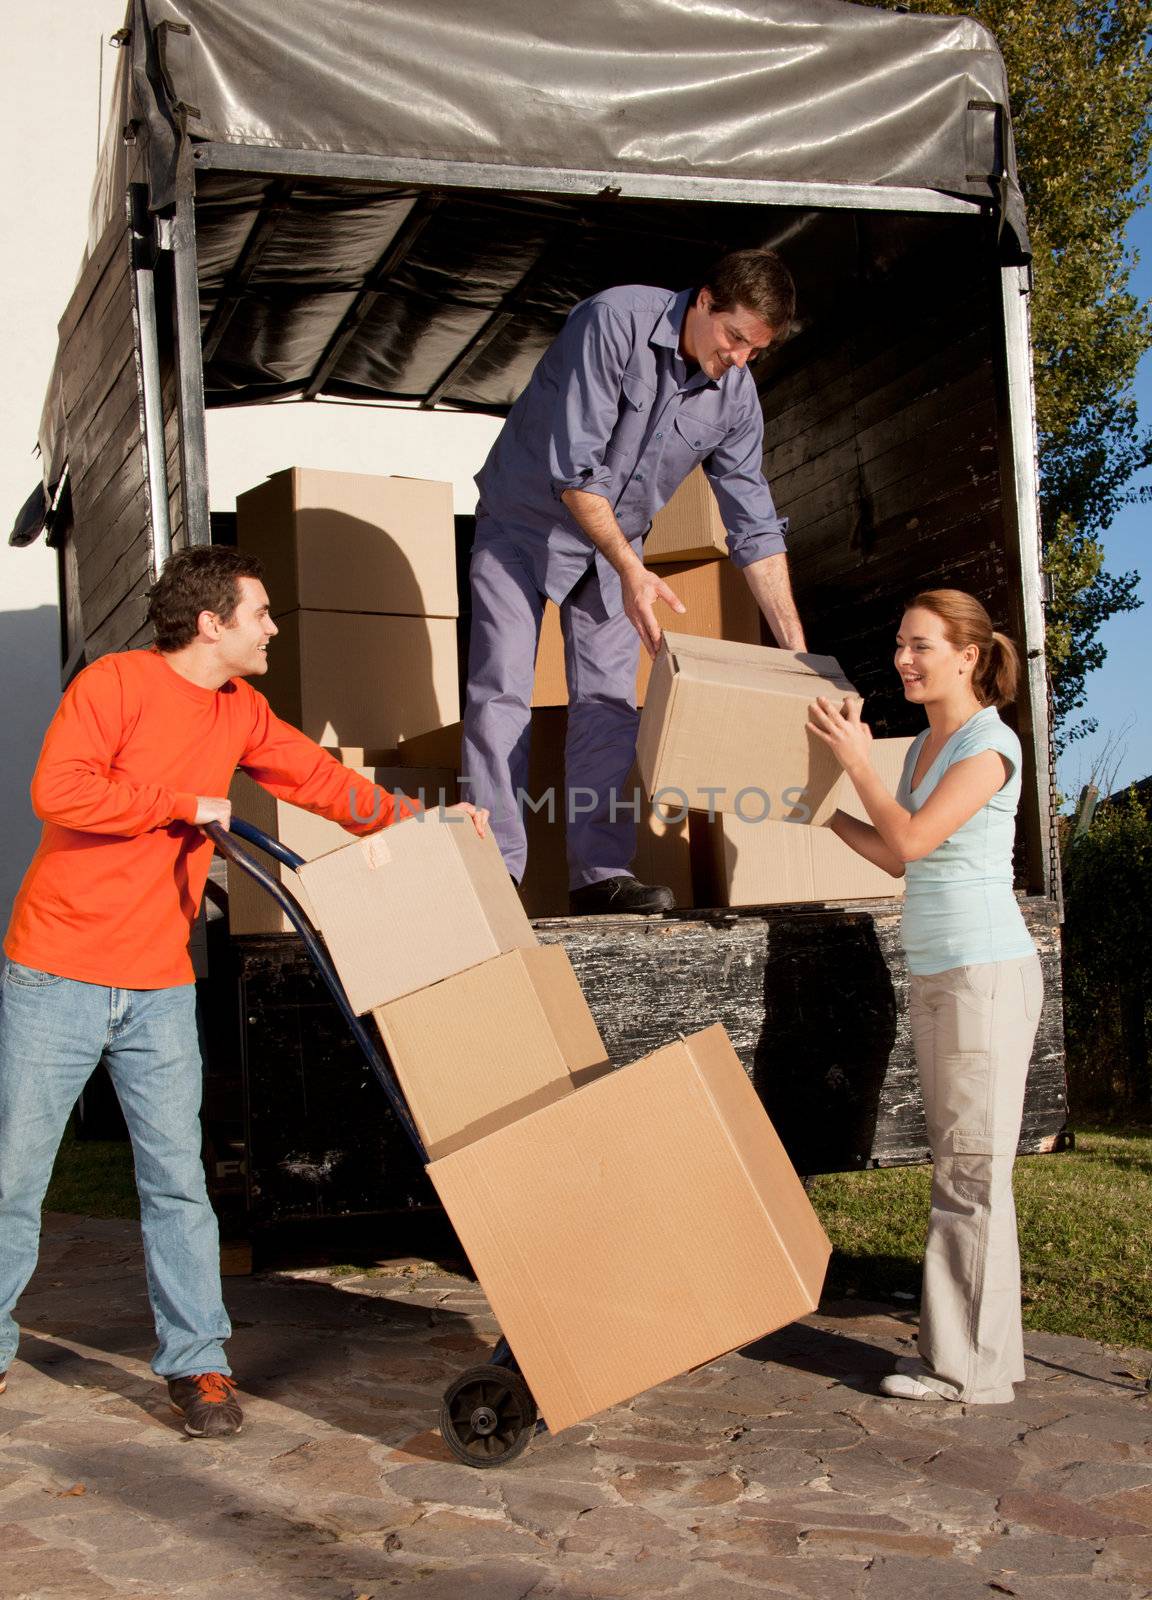 A group of people moving boxes from a trailer